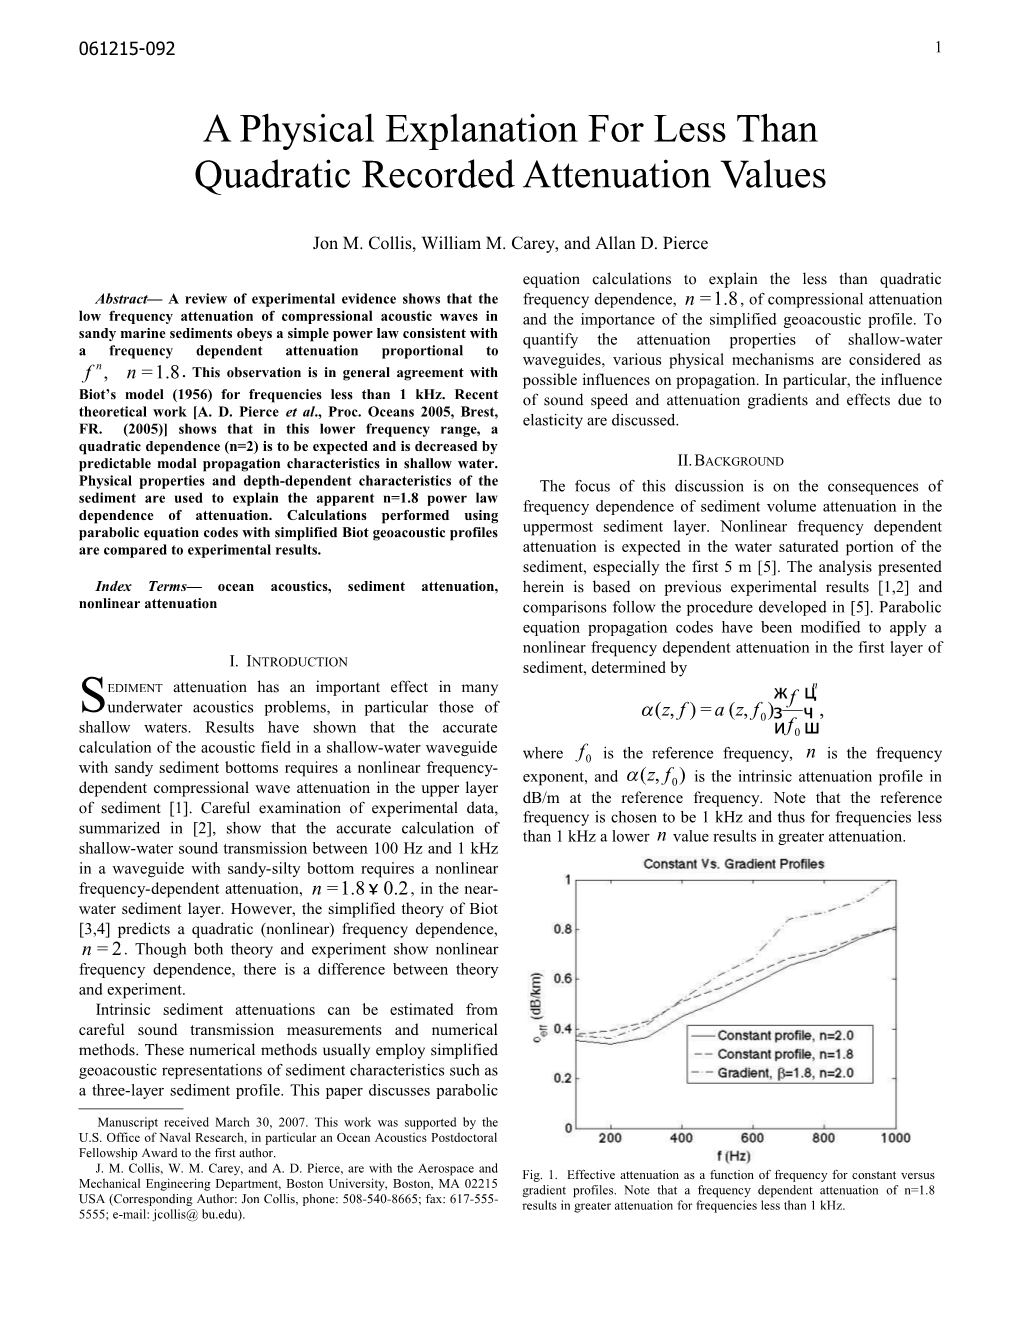 A Physical Explanation for Less Than Quadratic Recorded Attenuation Values